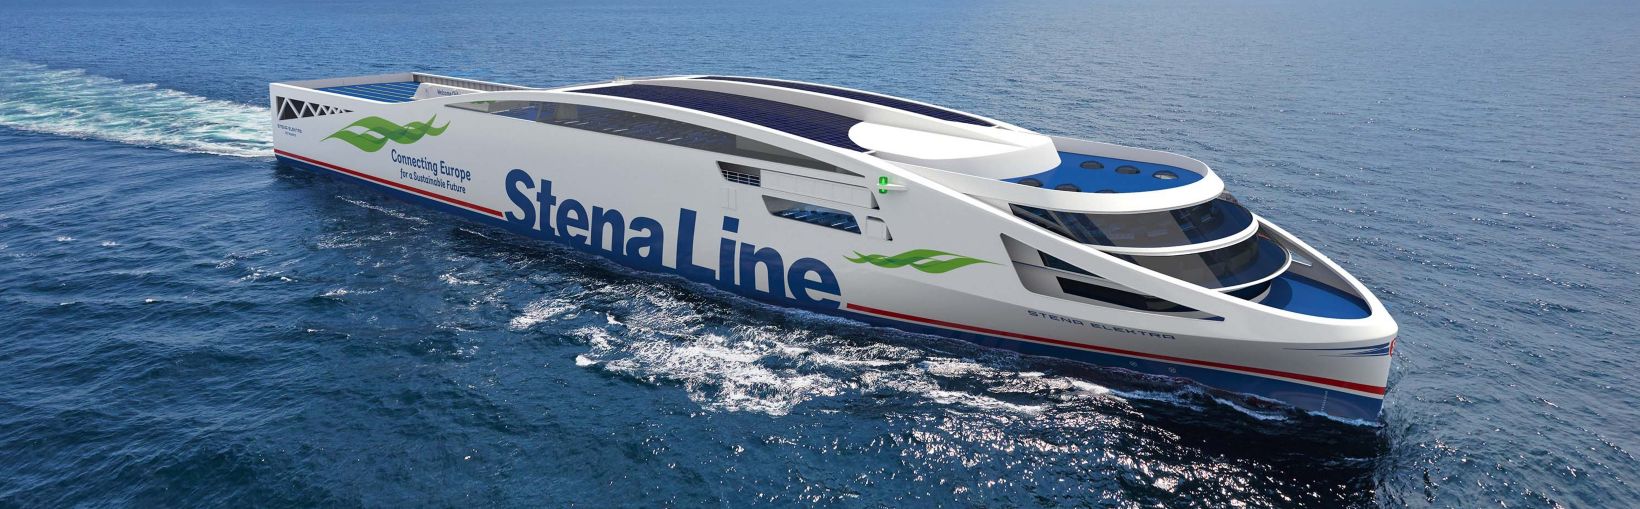 Concept image of the fully electric Stena Elektra ferry